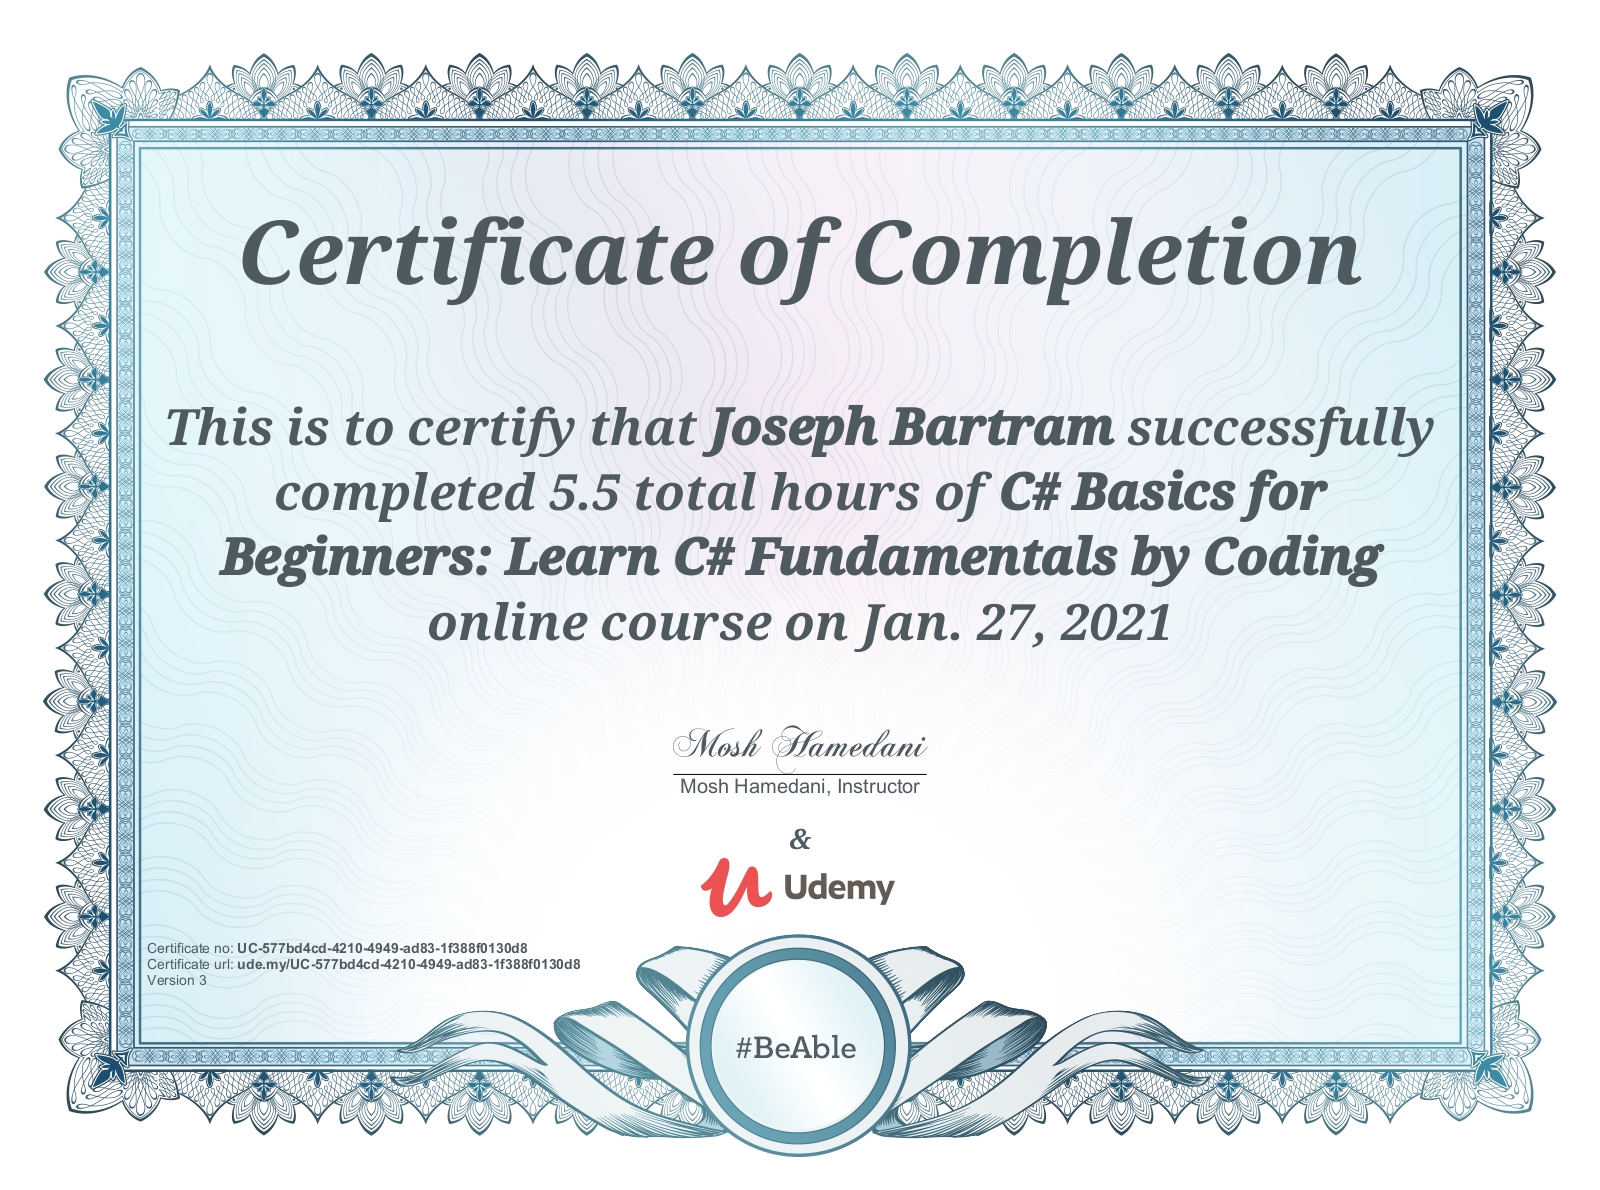 image of udemy certificate